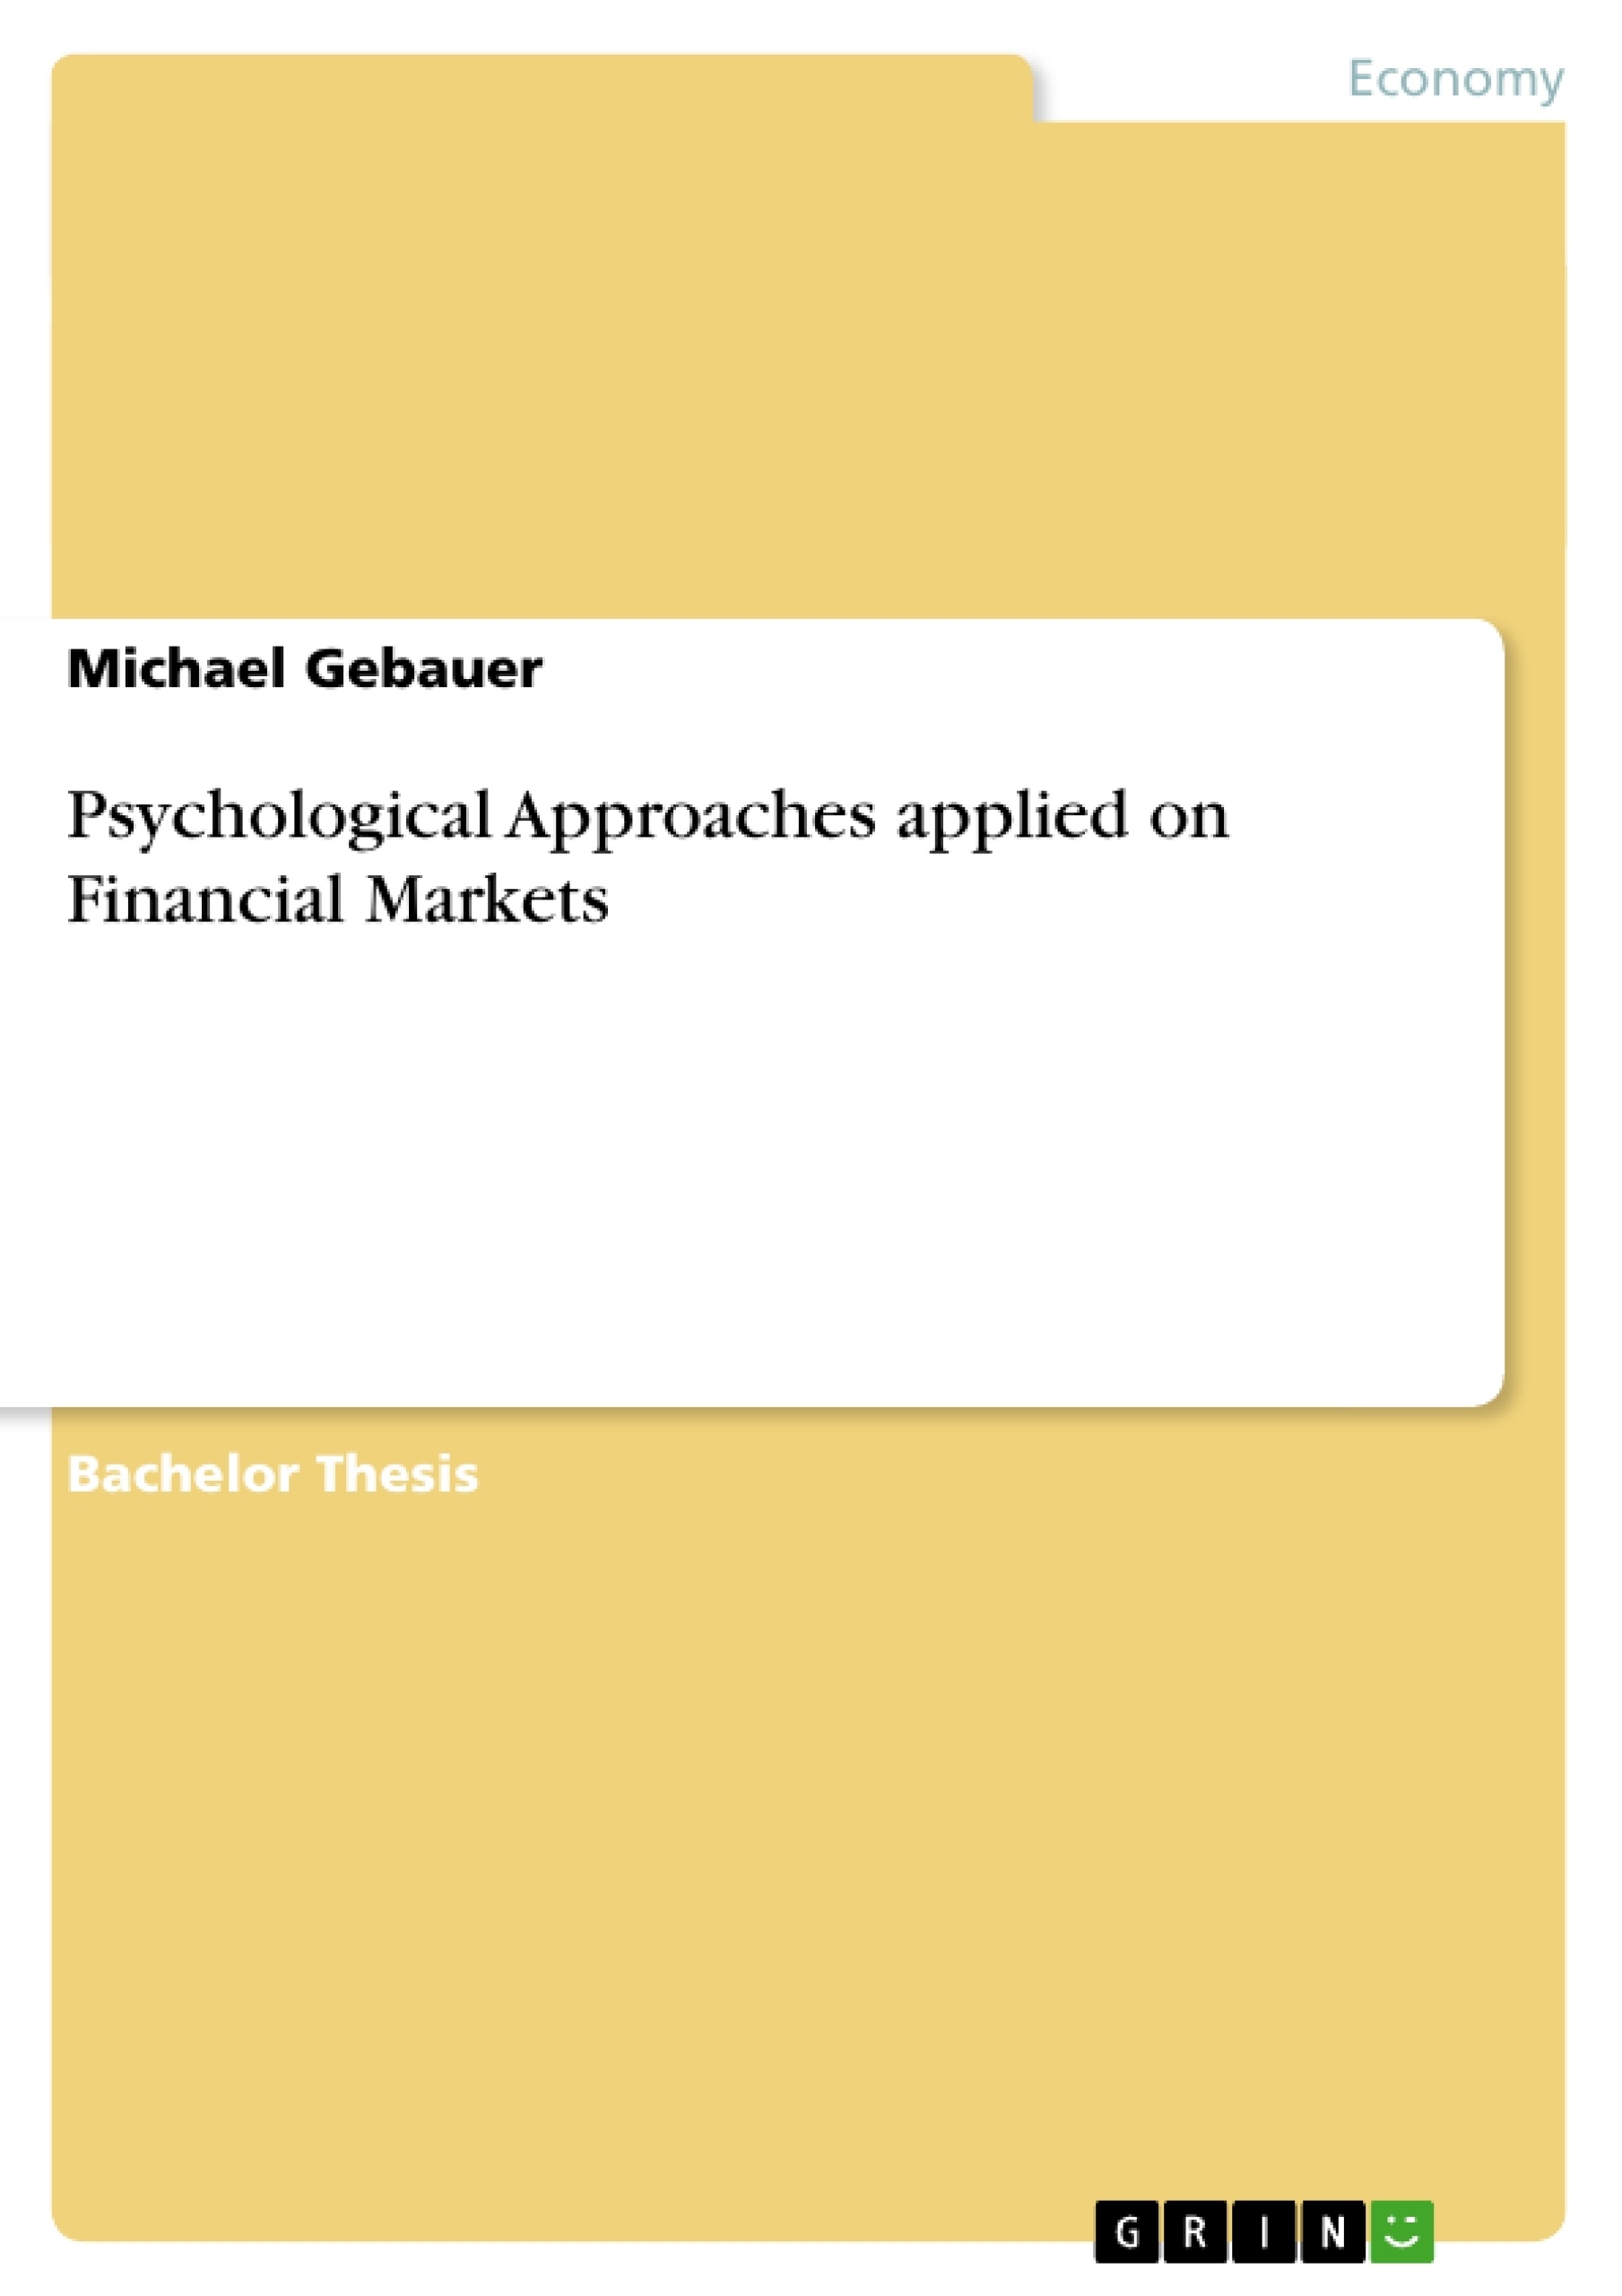 Title: Psychological Approaches applied on Financial Markets